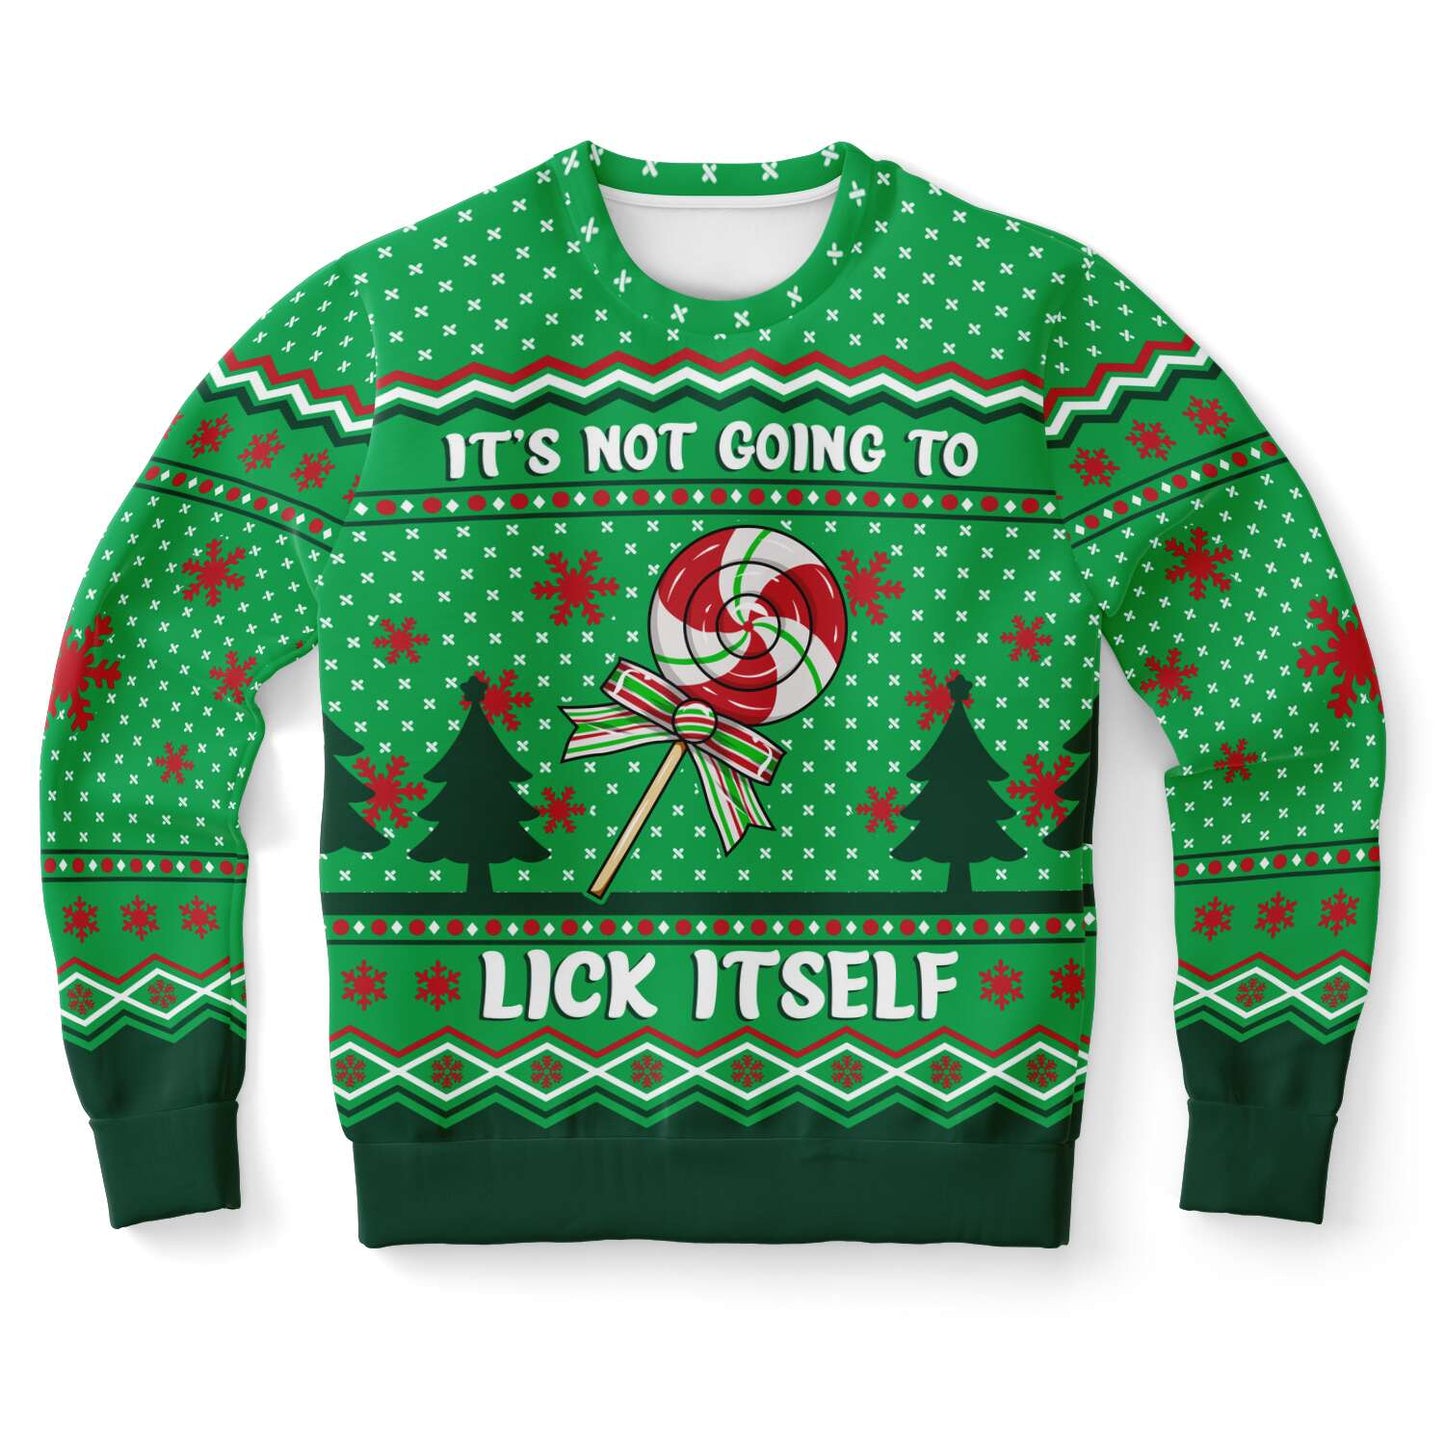 It's Not Going to Lick Itself - Funny Inappropriate Ugly Christmas Sweater (Sweatshirt) XS